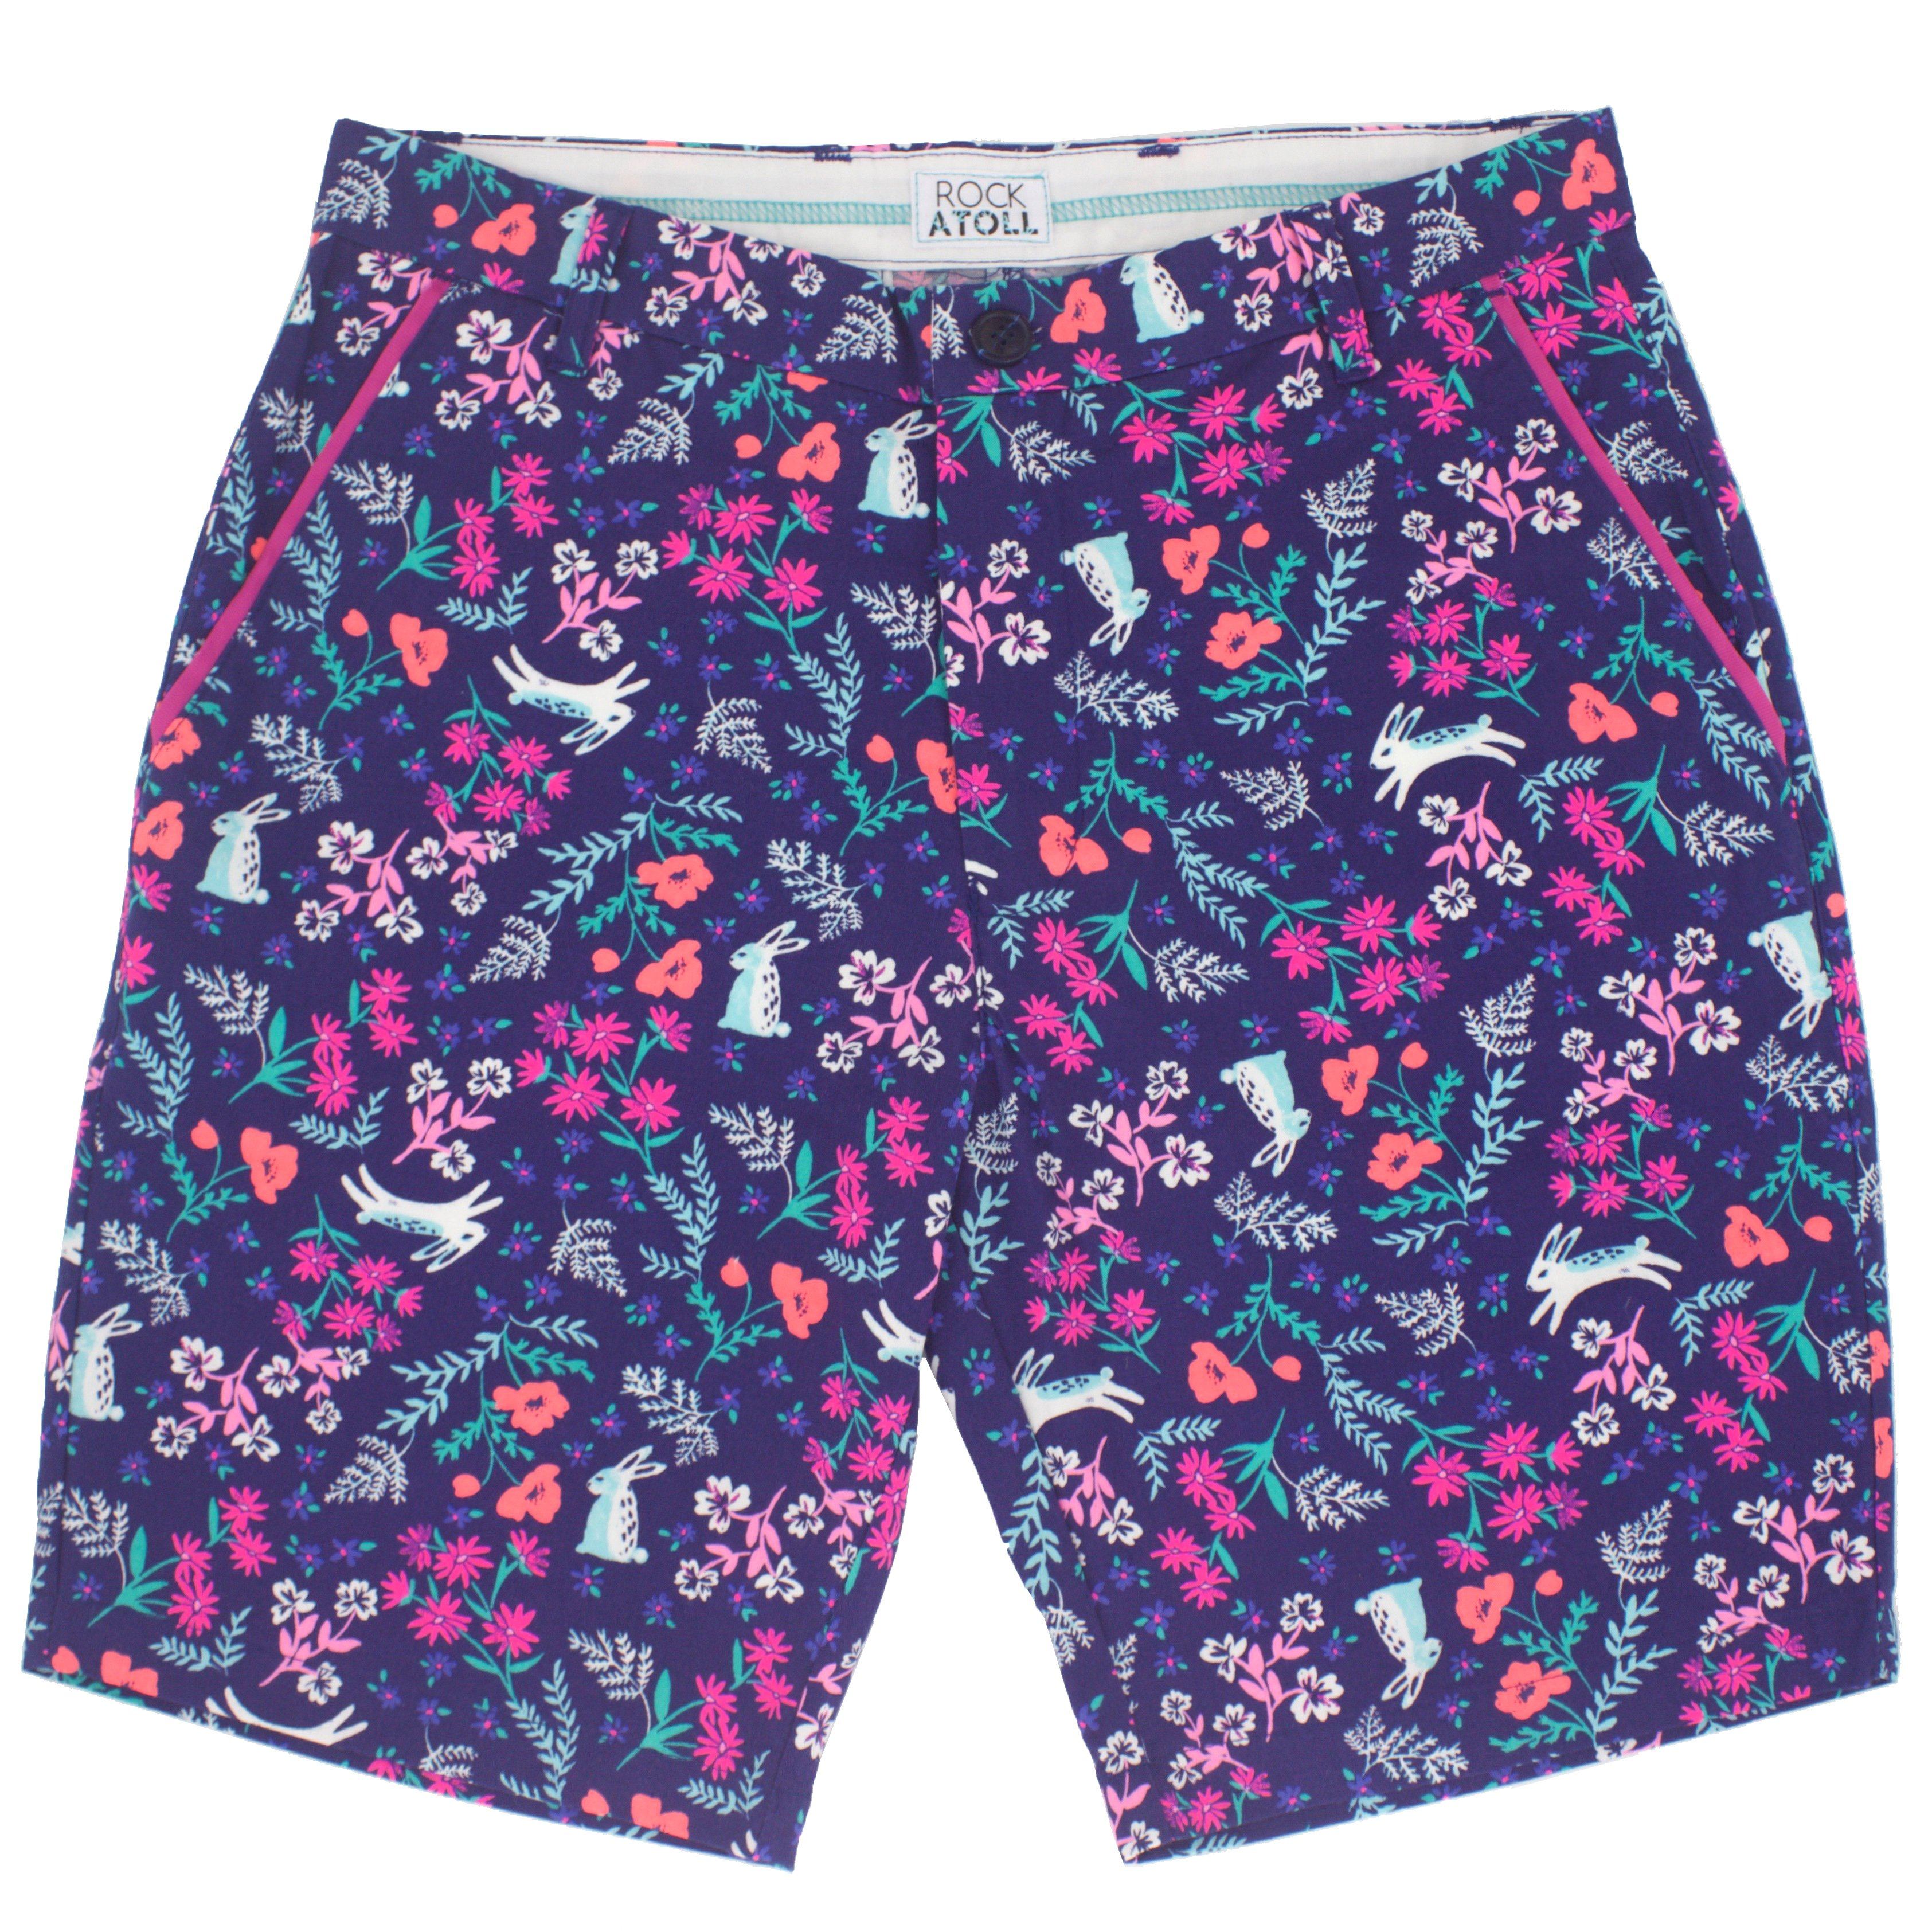 Purple Bunny Rabbit and Floral Print Flat Front Men's Shorts